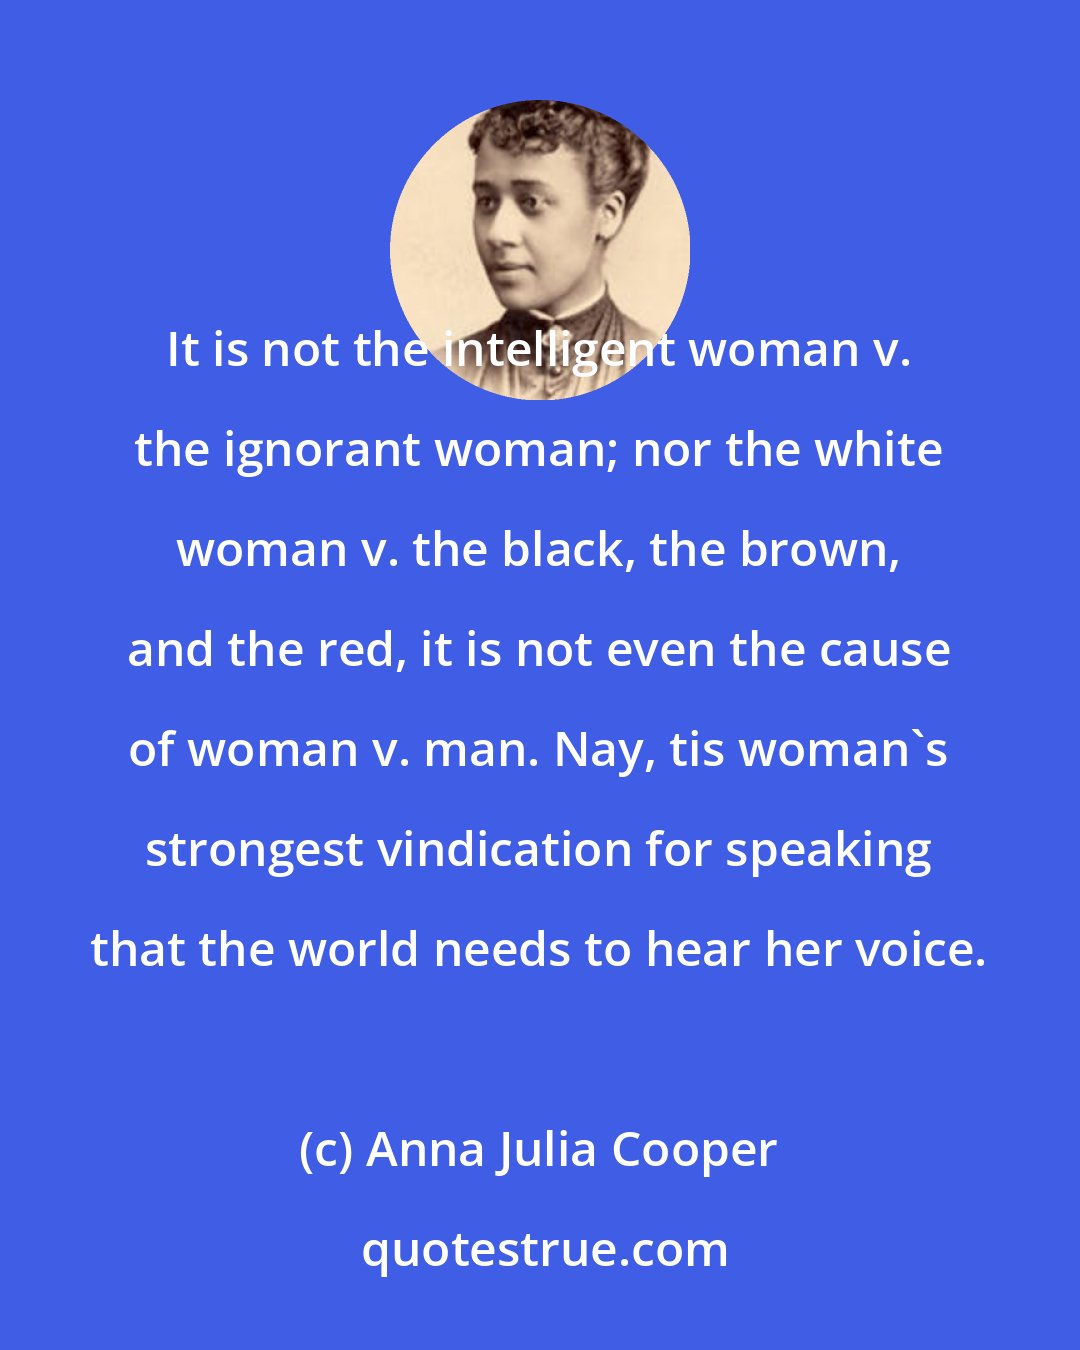 Anna Julia Cooper: It is not the intelligent woman v. the ignorant woman; nor the white woman v. the black, the brown, and the red, it is not even the cause of woman v. man. Nay, tis woman's strongest vindication for speaking that the world needs to hear her voice.